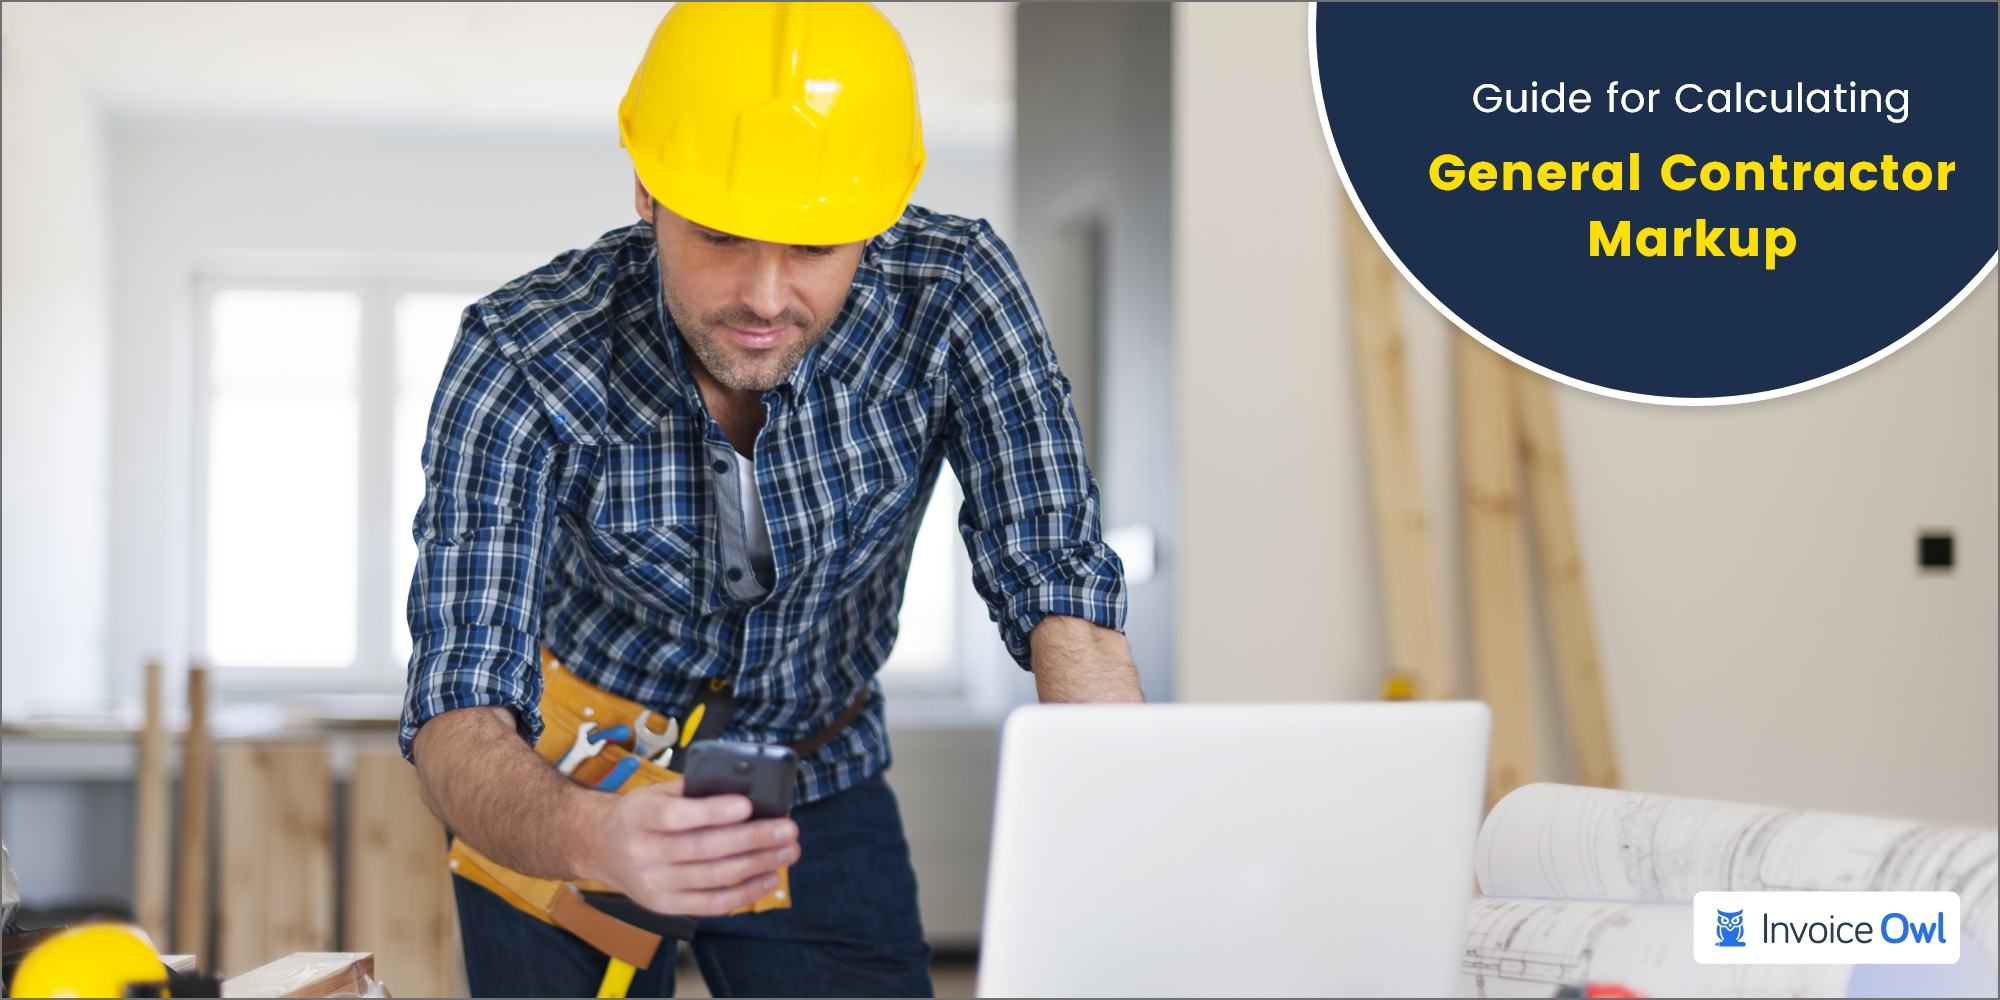 Guide for Calculating General Contractor Markup